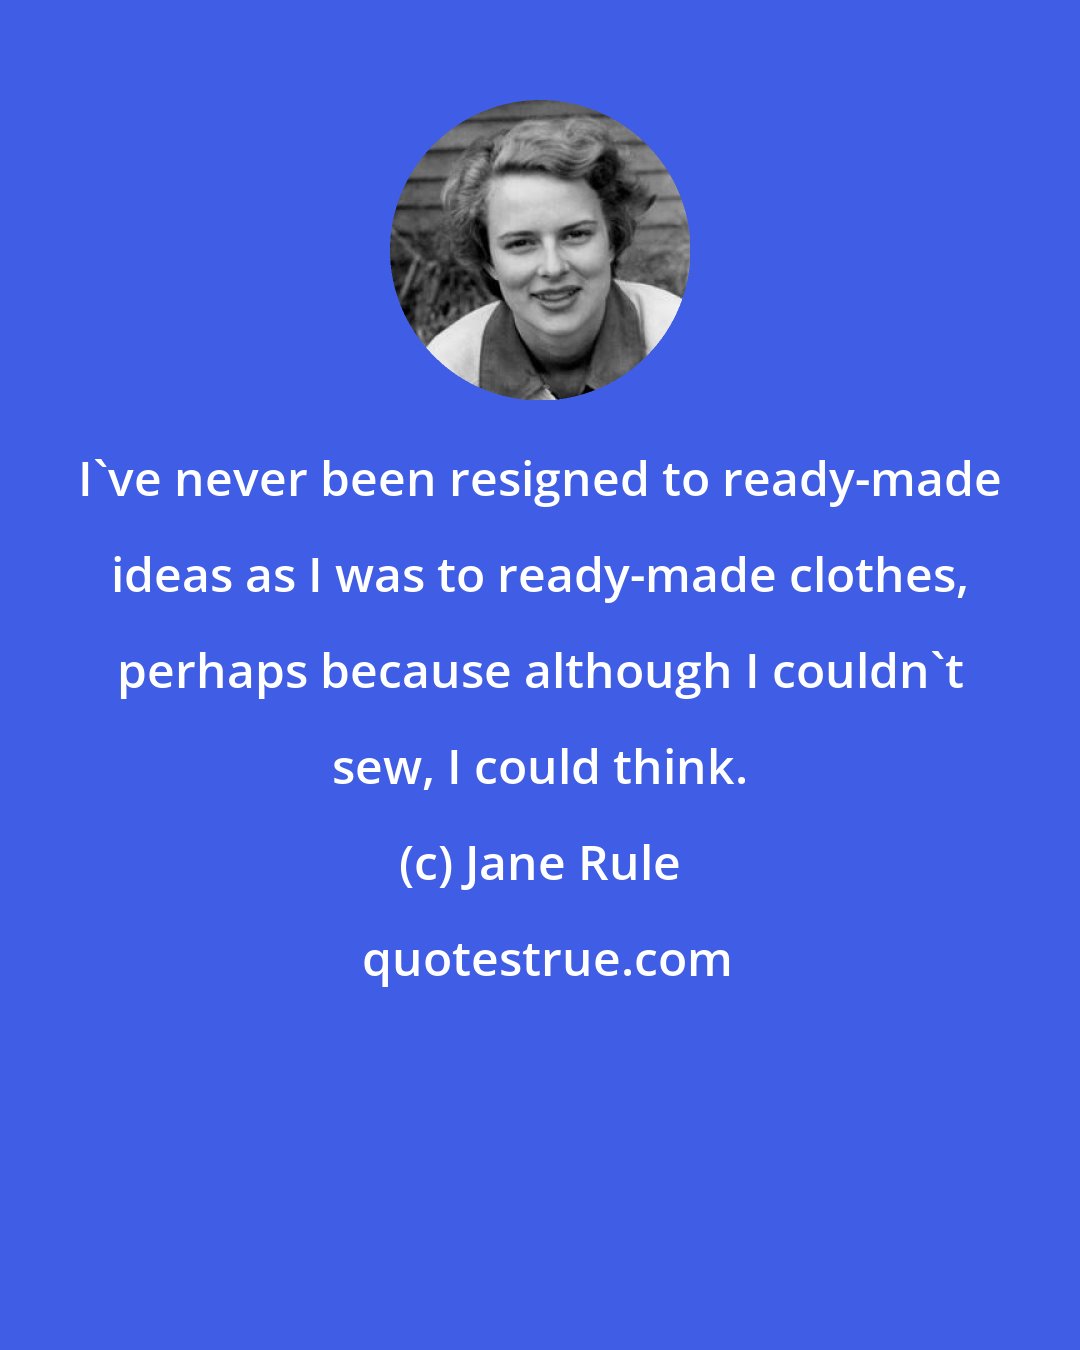 Jane Rule: I've never been resigned to ready-made ideas as I was to ready-made clothes, perhaps because although I couldn't sew, I could think.